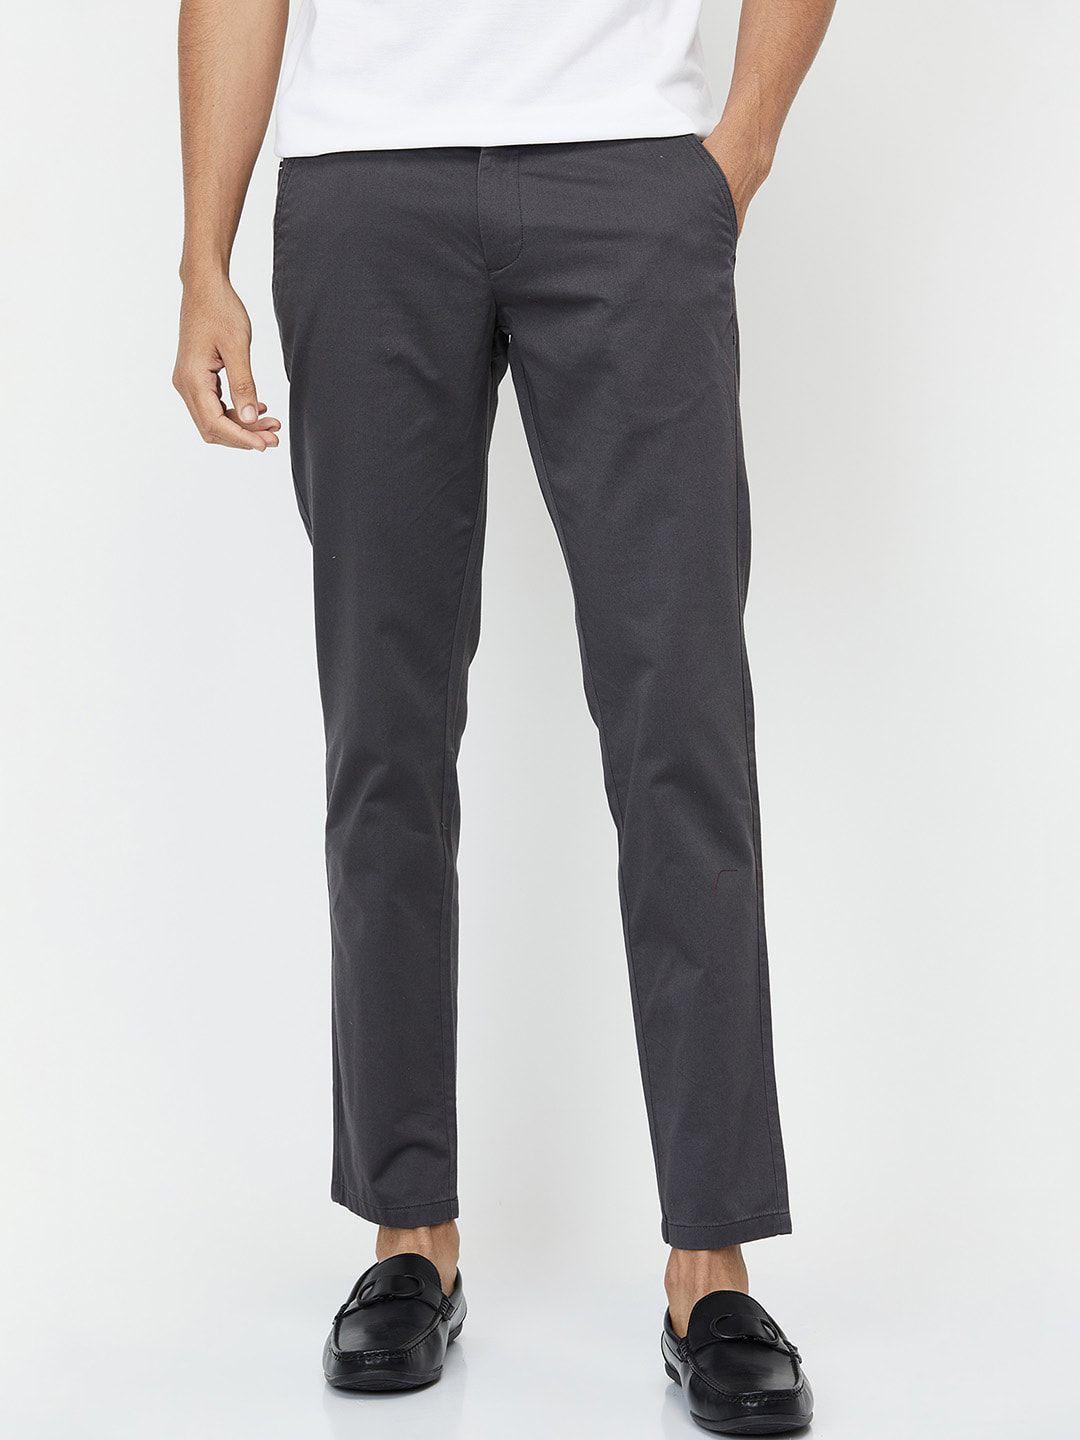 max men grey chinos trousers